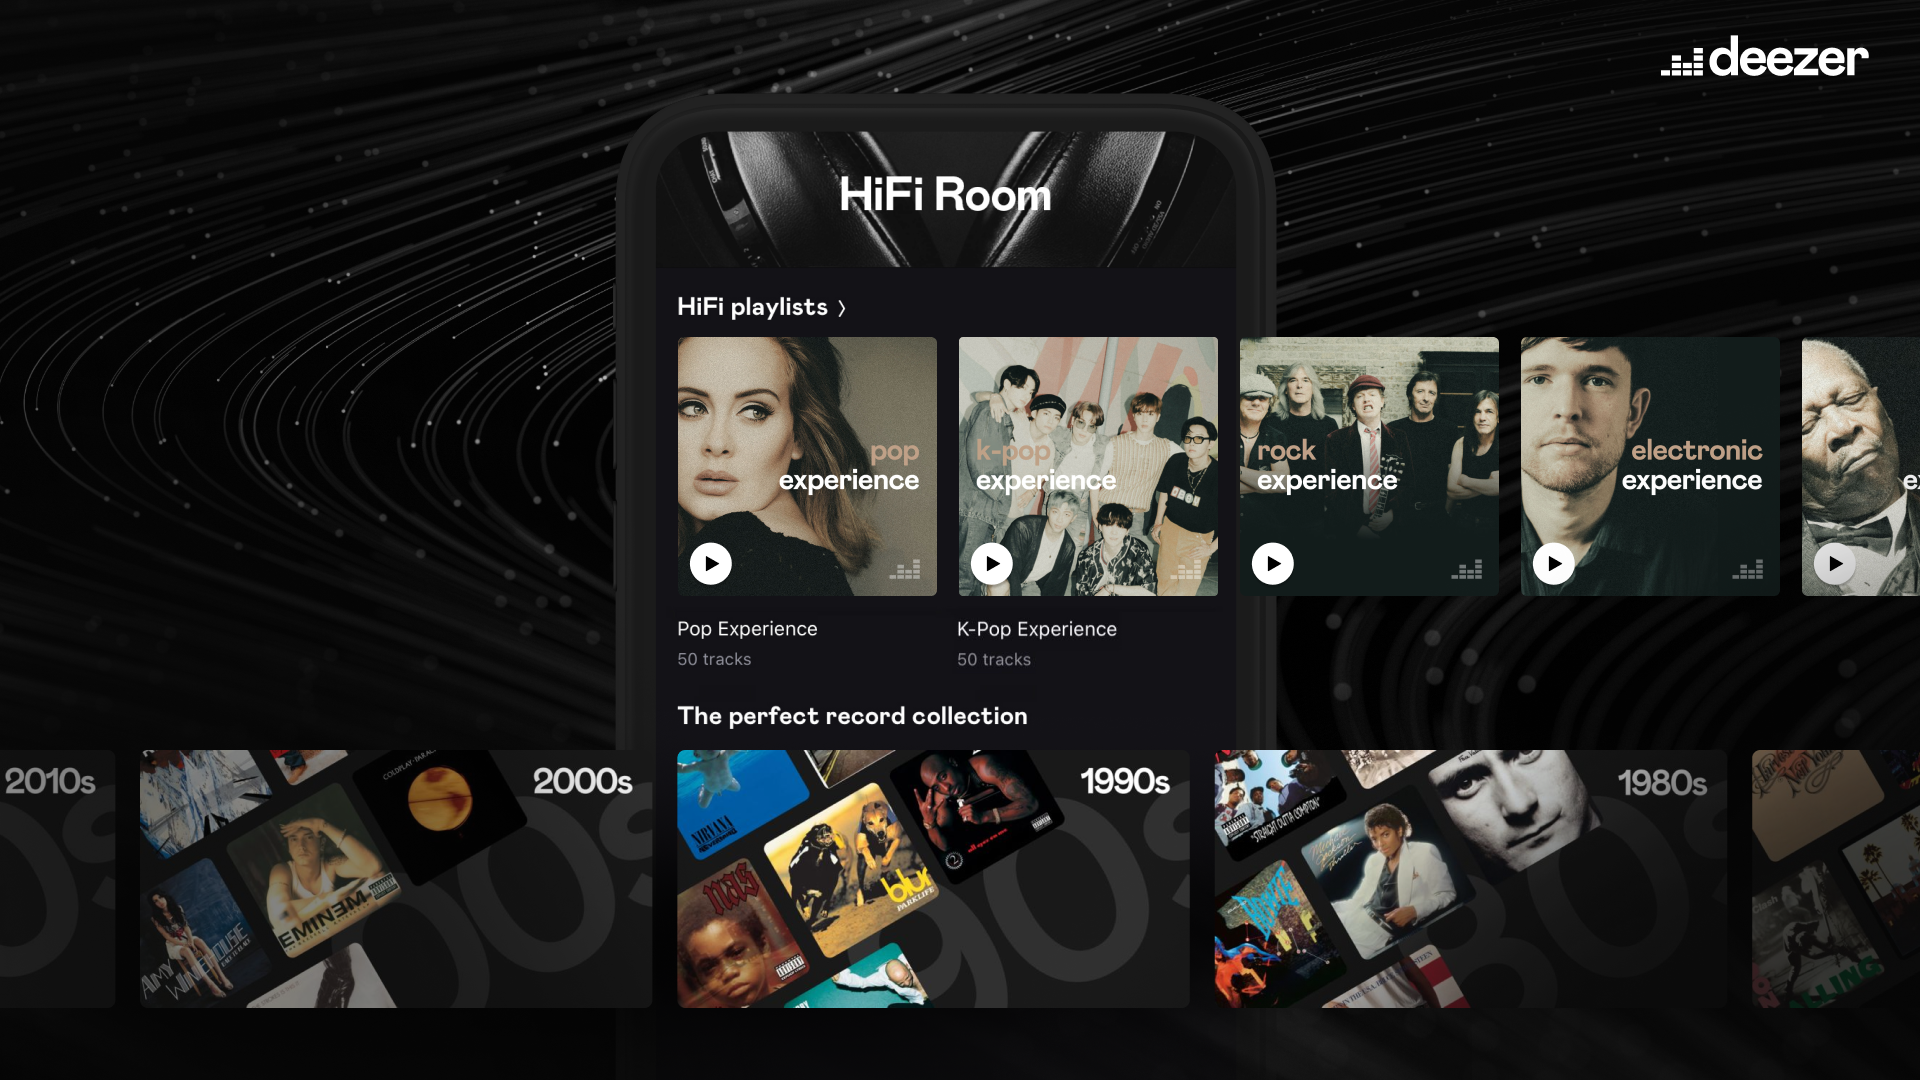 Deezer’s HiFi room surrounds you with only the best quality music